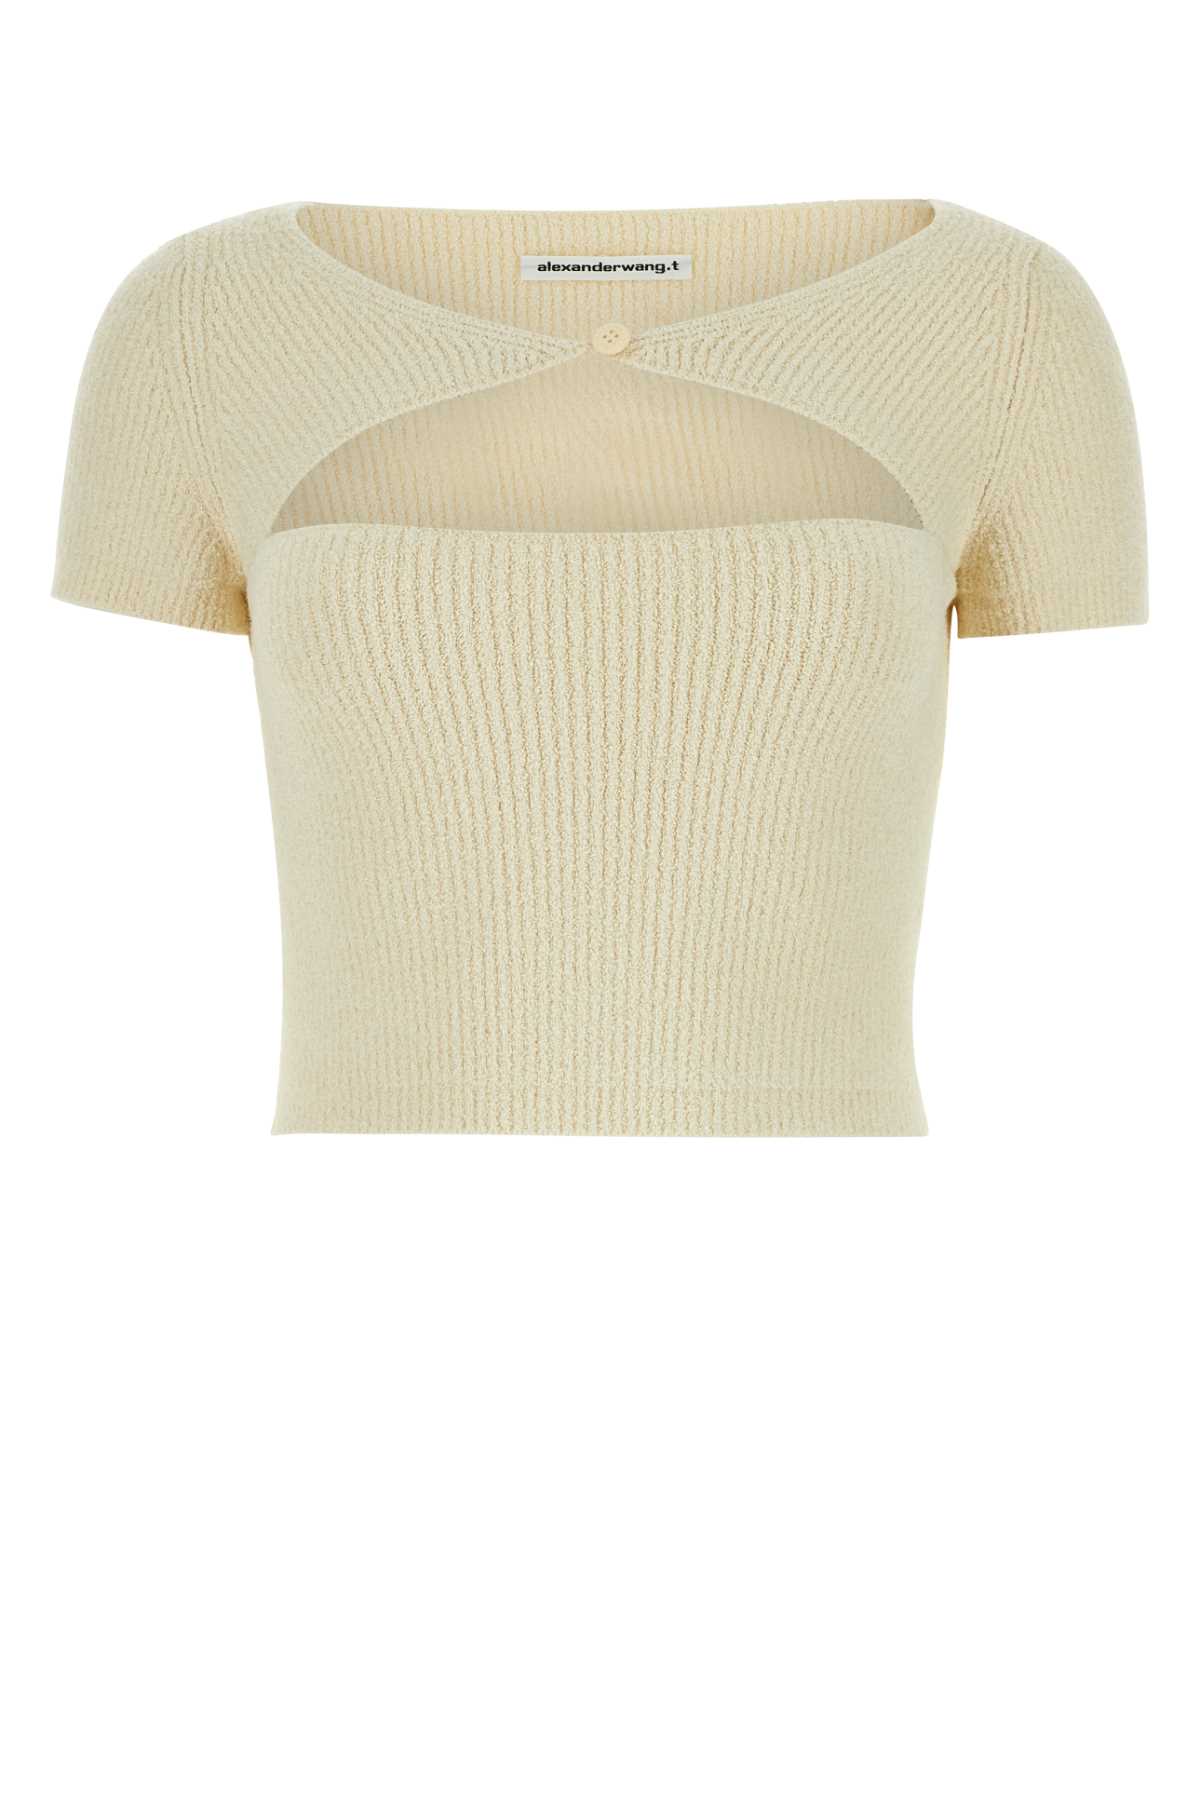 Shop Alexander Wang T Ivory Stretch Cotton Blend Top In Vanillaice